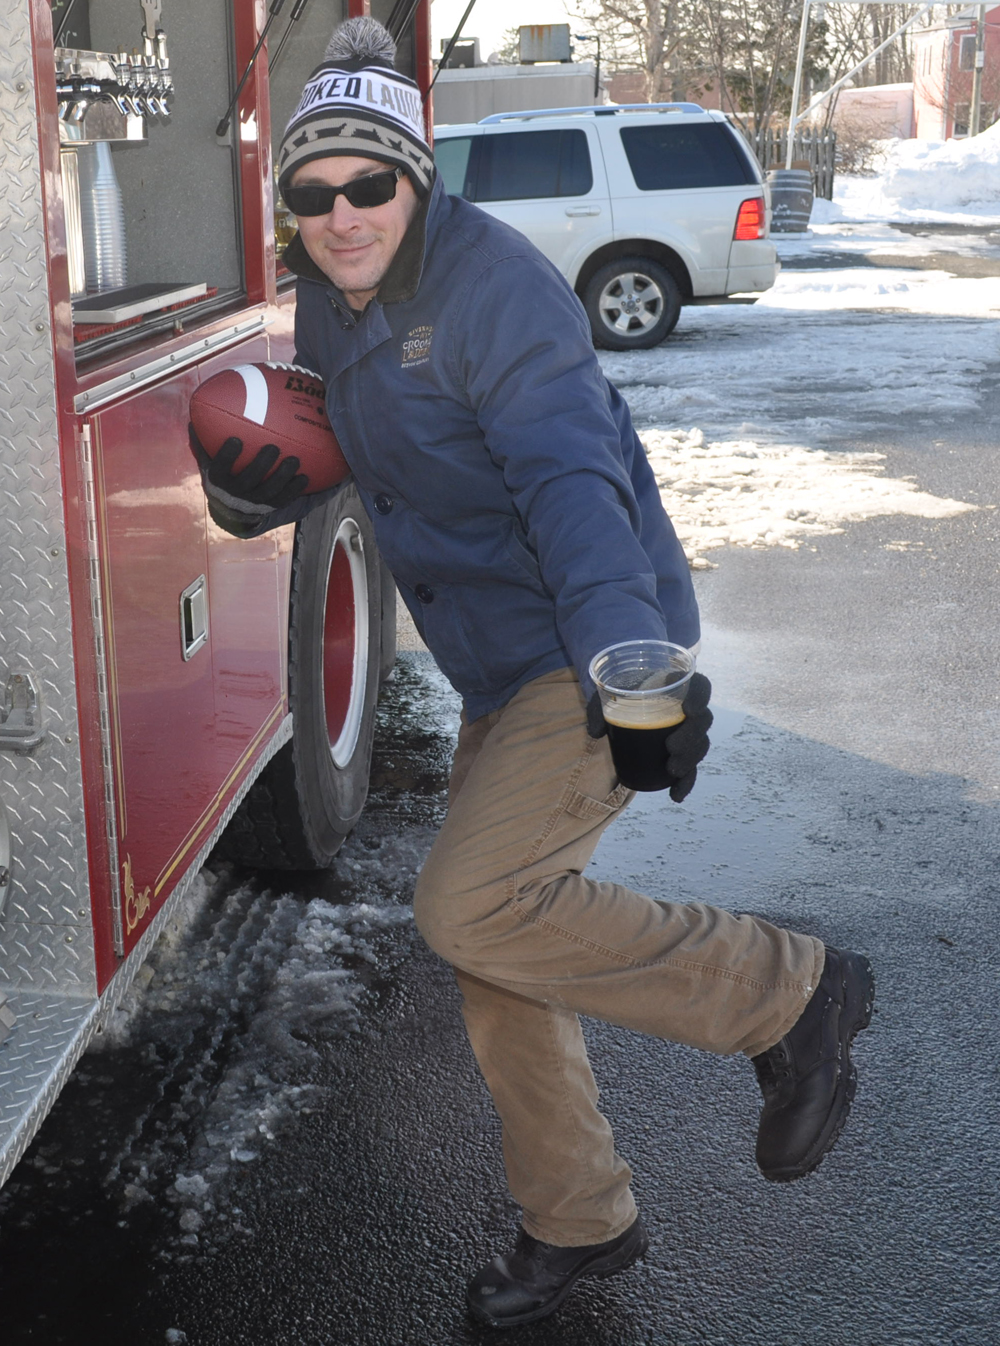 Nate Payne of Crooked Ladder Brewing Company strikes the Heisman pose ... or something like it.